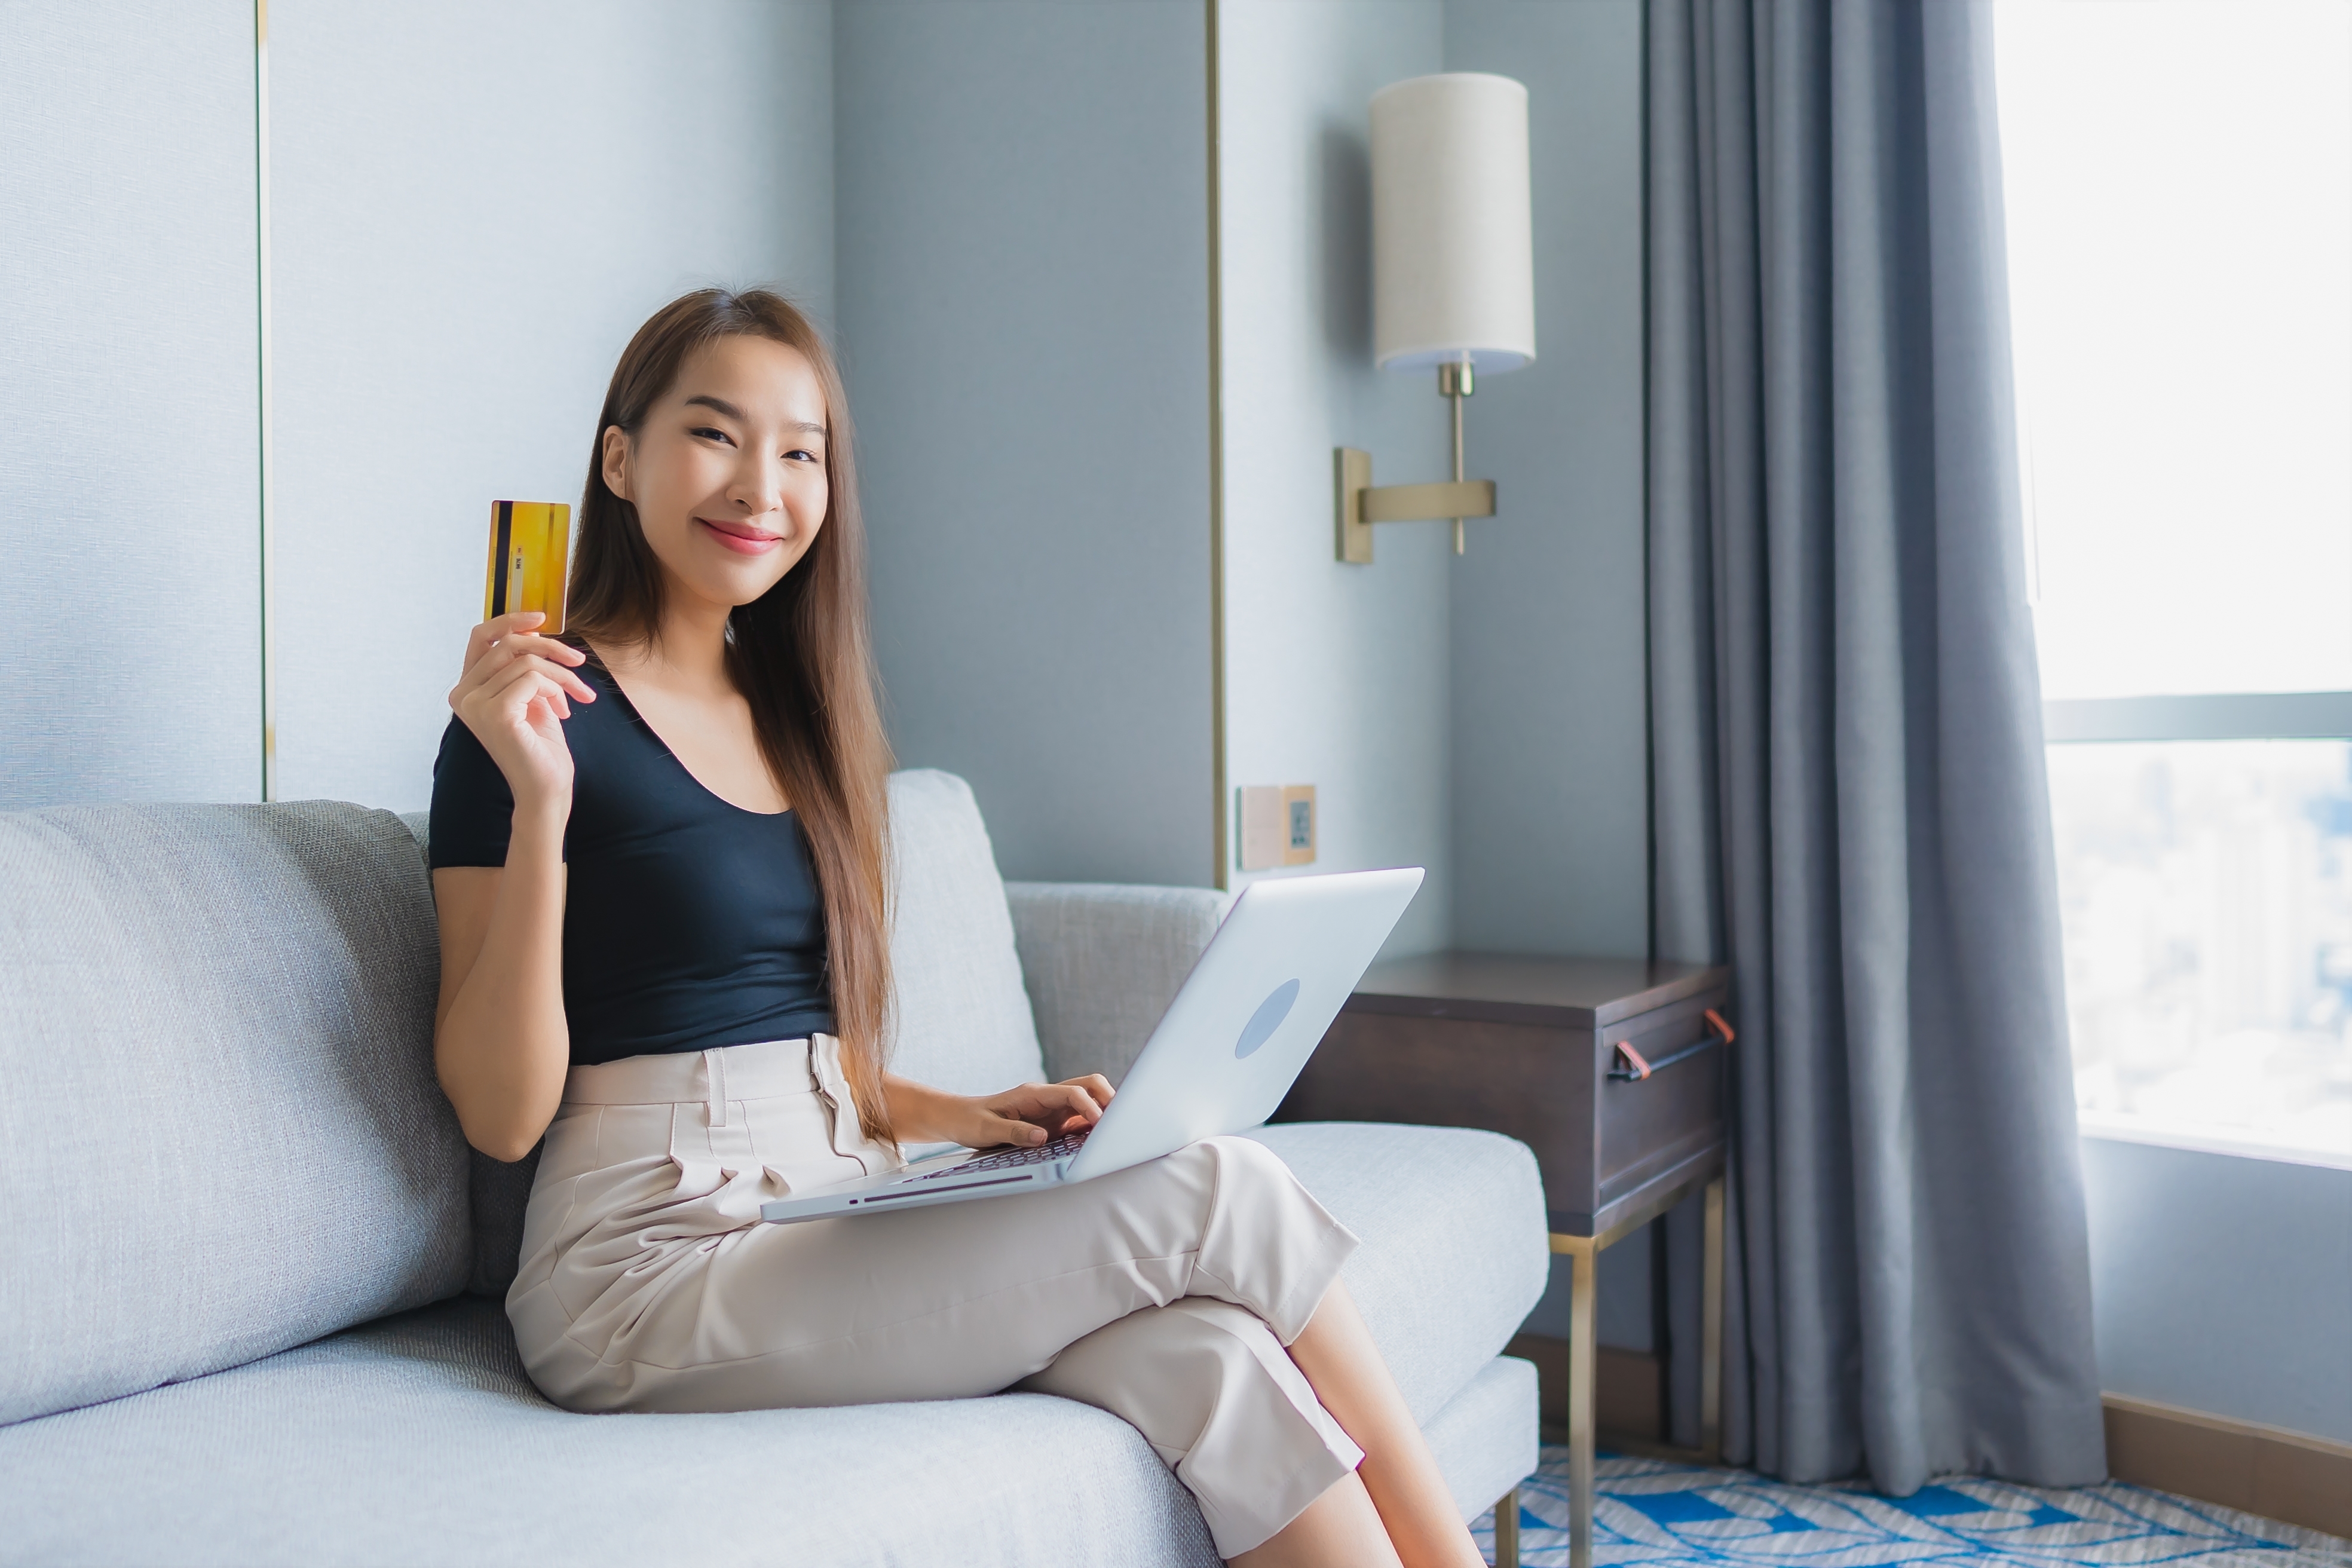 https://img.moneyduck.com/article_attachment/1688460491-portrait-beautiful-young-asian-woman-use-smart-mobile-phone-laptop-with-credit-card-sofa-living-room-area.jpg